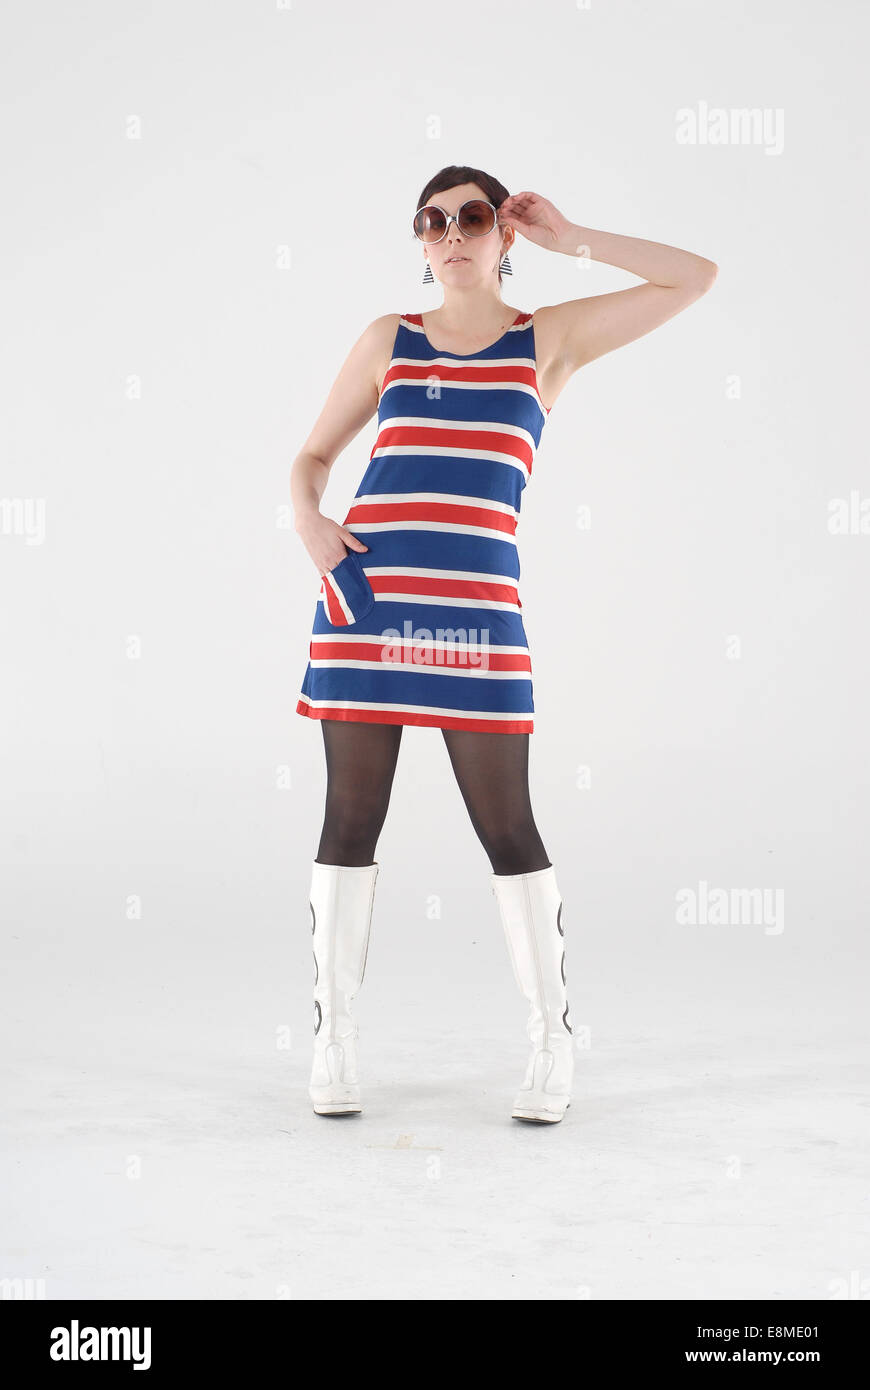 woman in fancy dress comedy costume in 1960s fashion and crazy funny mod outfit Stock Photo